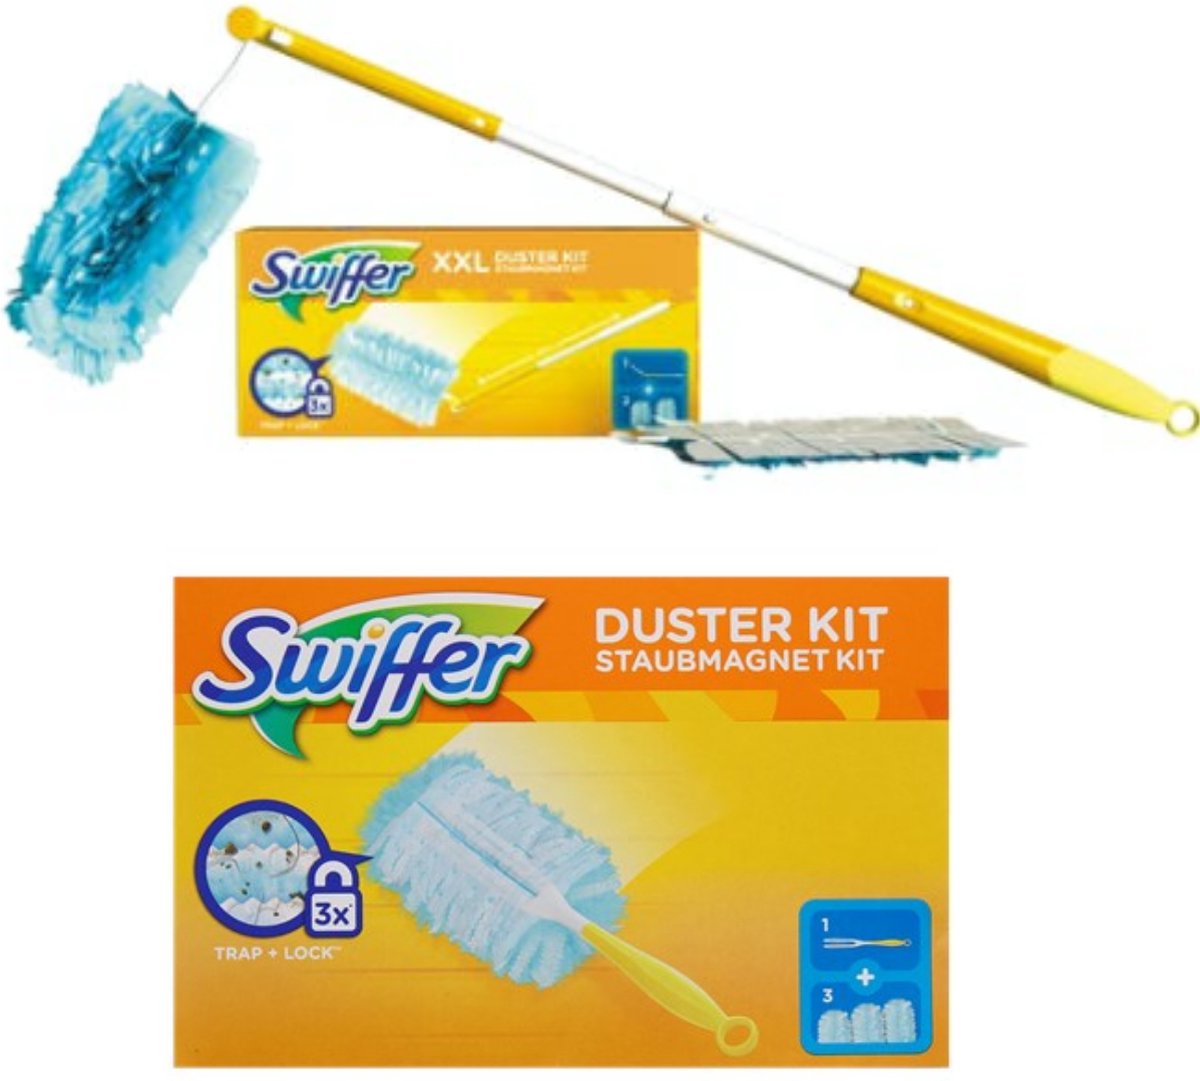 Swiffer Duster, Recharges Plumeau, 5 paquets x 5 Recharges